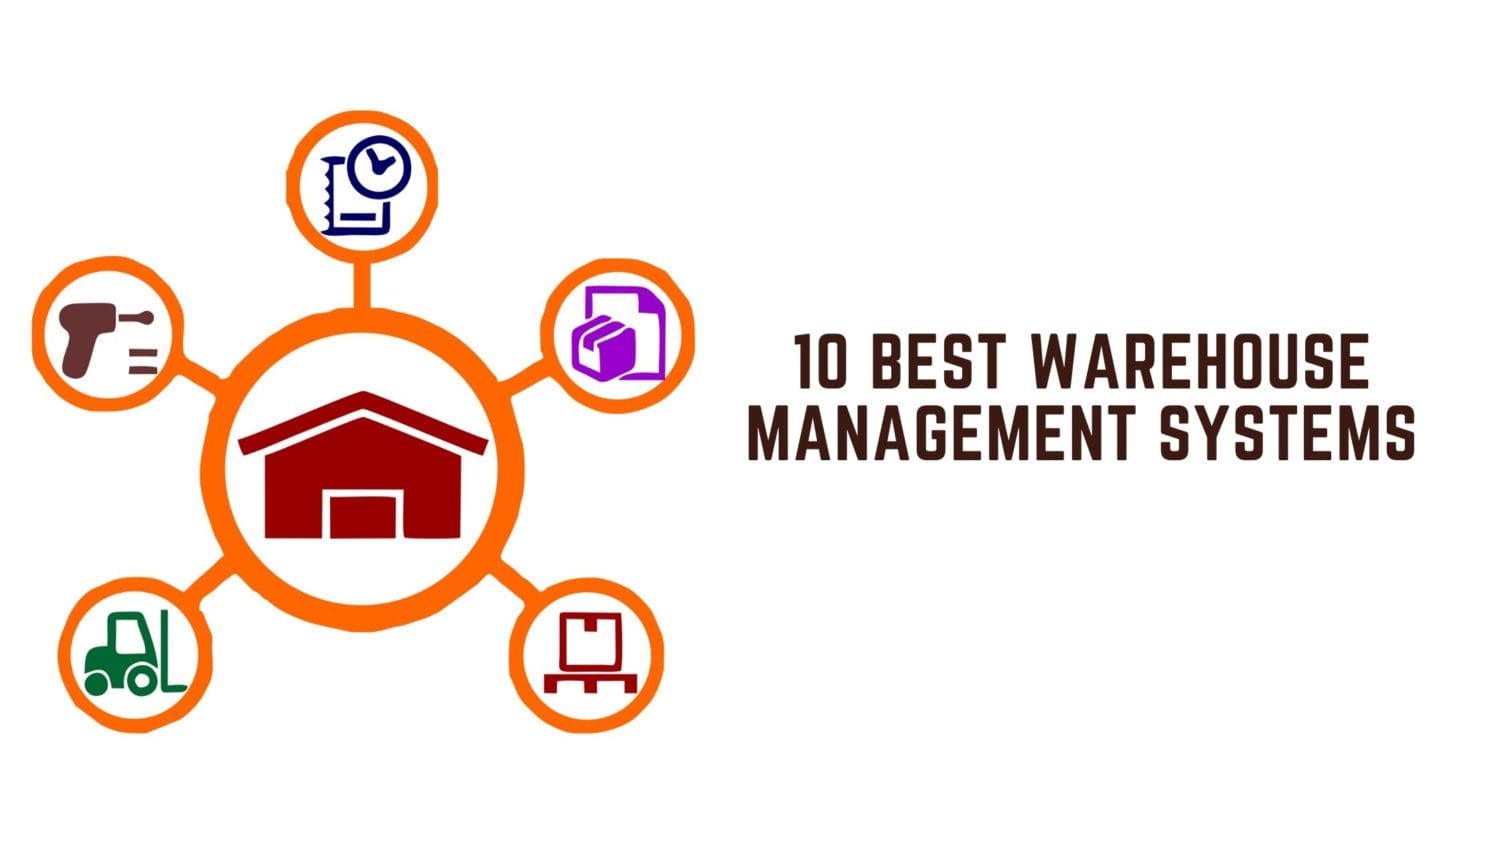 10 Best Warehouse Management Systems